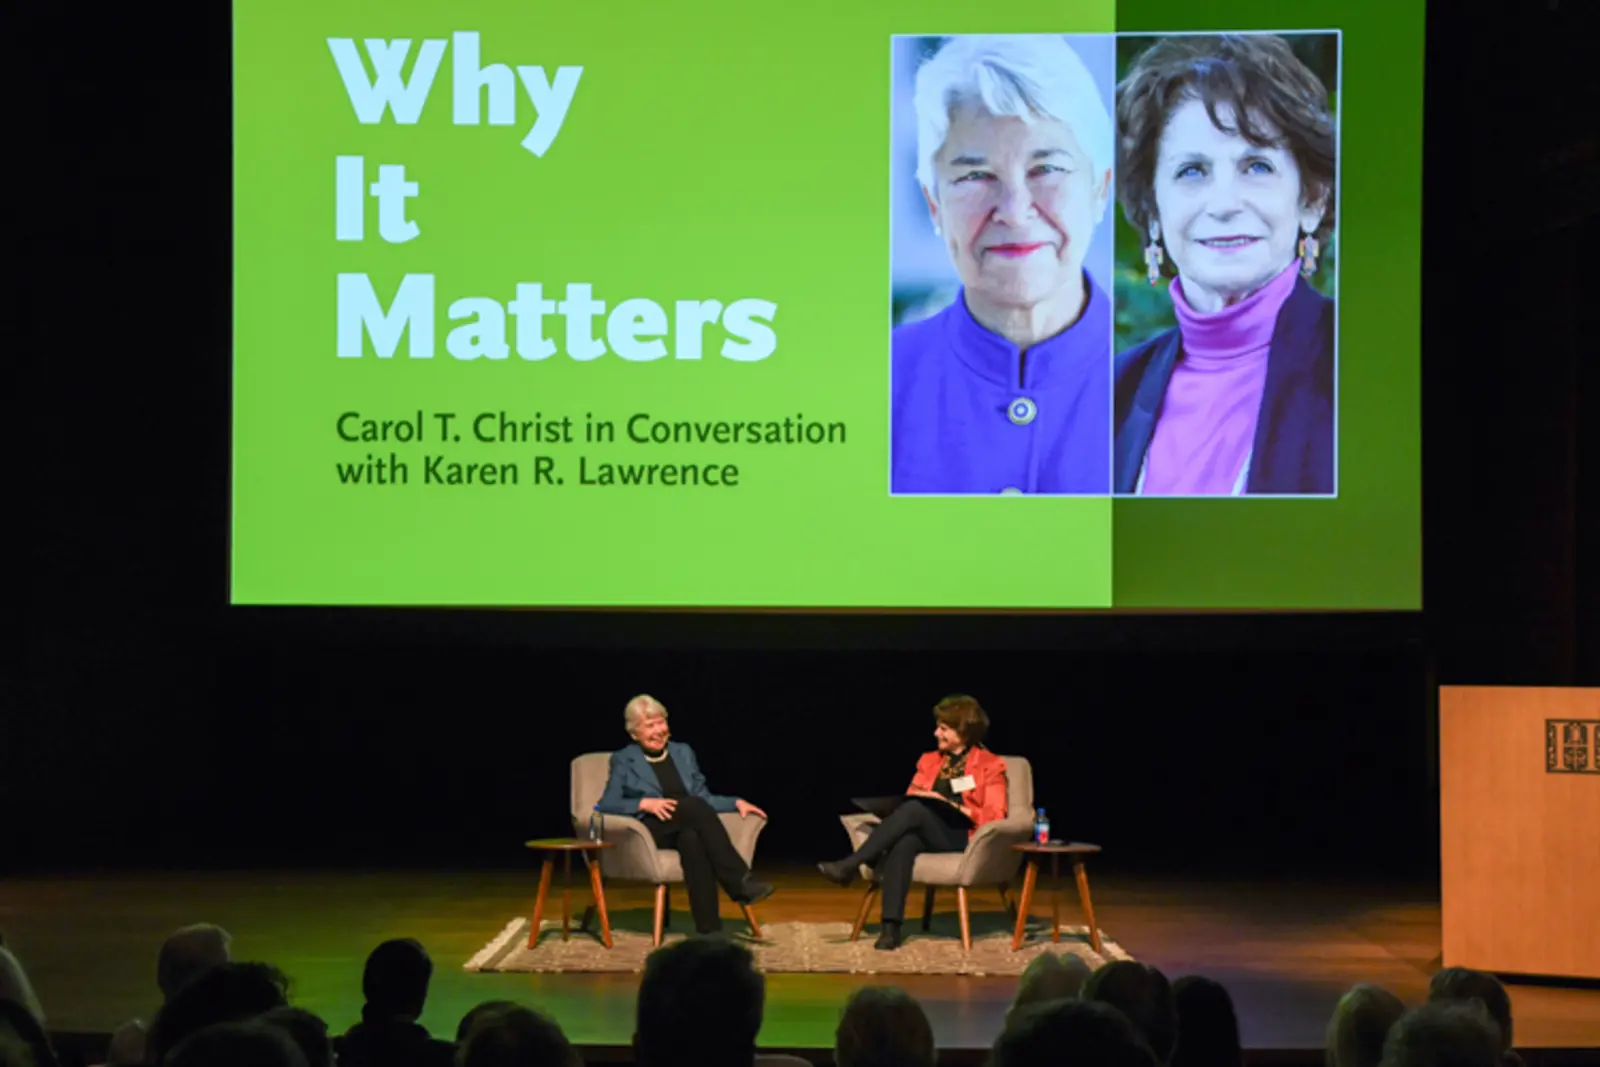 Two people sit in chairs on a stage in front of an audience. A large projection screen has two portraits and reads “Why It Matters: Carol T. Christ in Conversation with Karen R. Lawrence.”